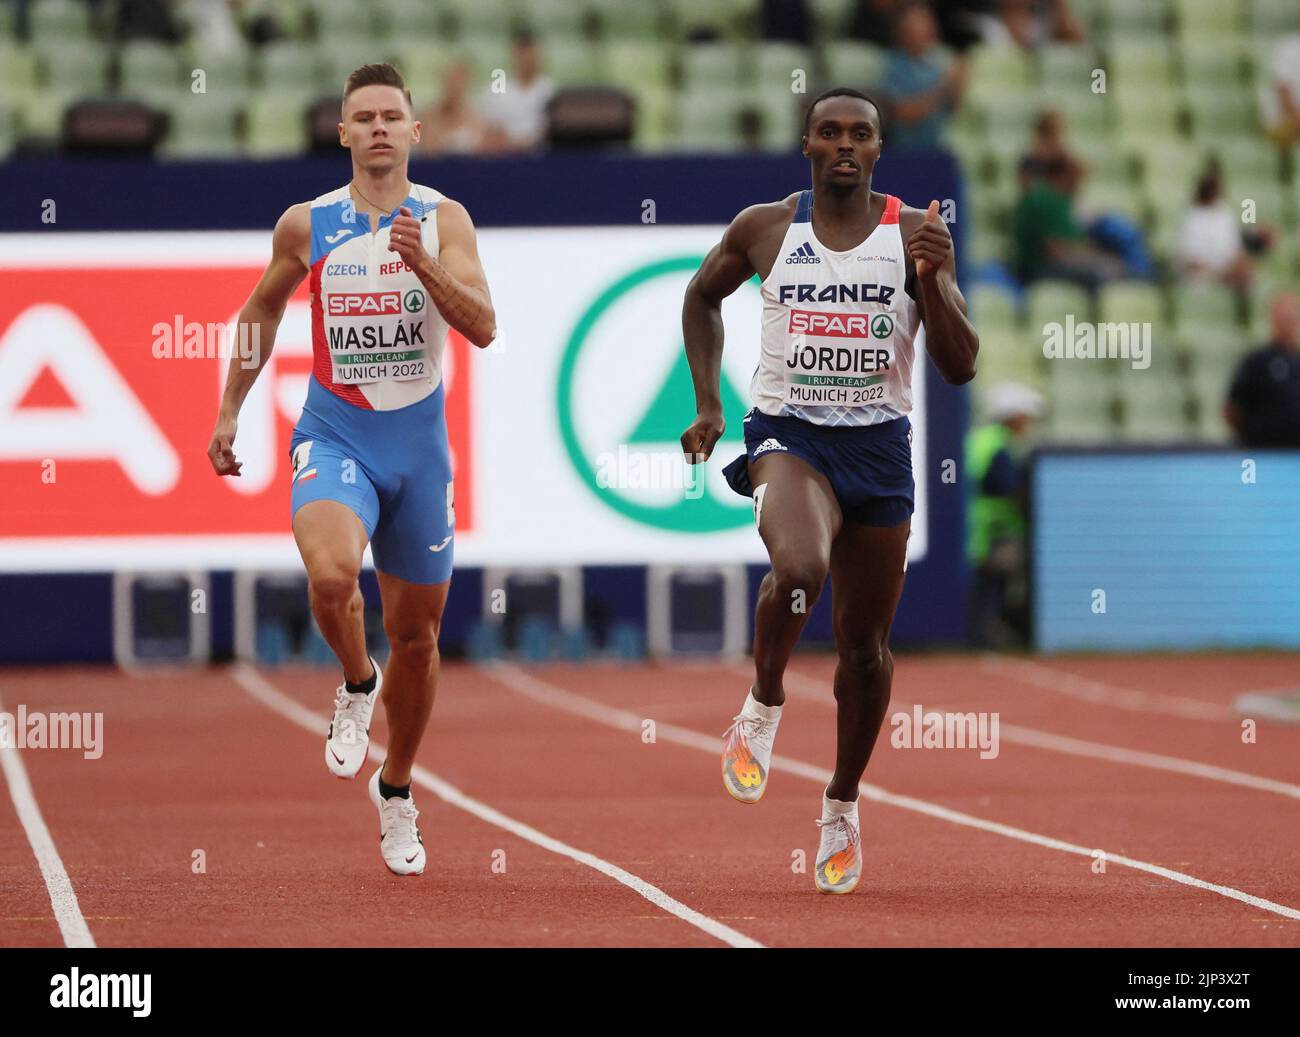 Athletics - 2022 European Championships - Olympiastadion, Munich, Germany - August 15, 2022 France's Tomas Jordier in action with Czech Republic's Pavel Maslak before winning the Men's 400m Round 1 Heat 4 REUTERS/Wolfgang Rattay Stock Photo